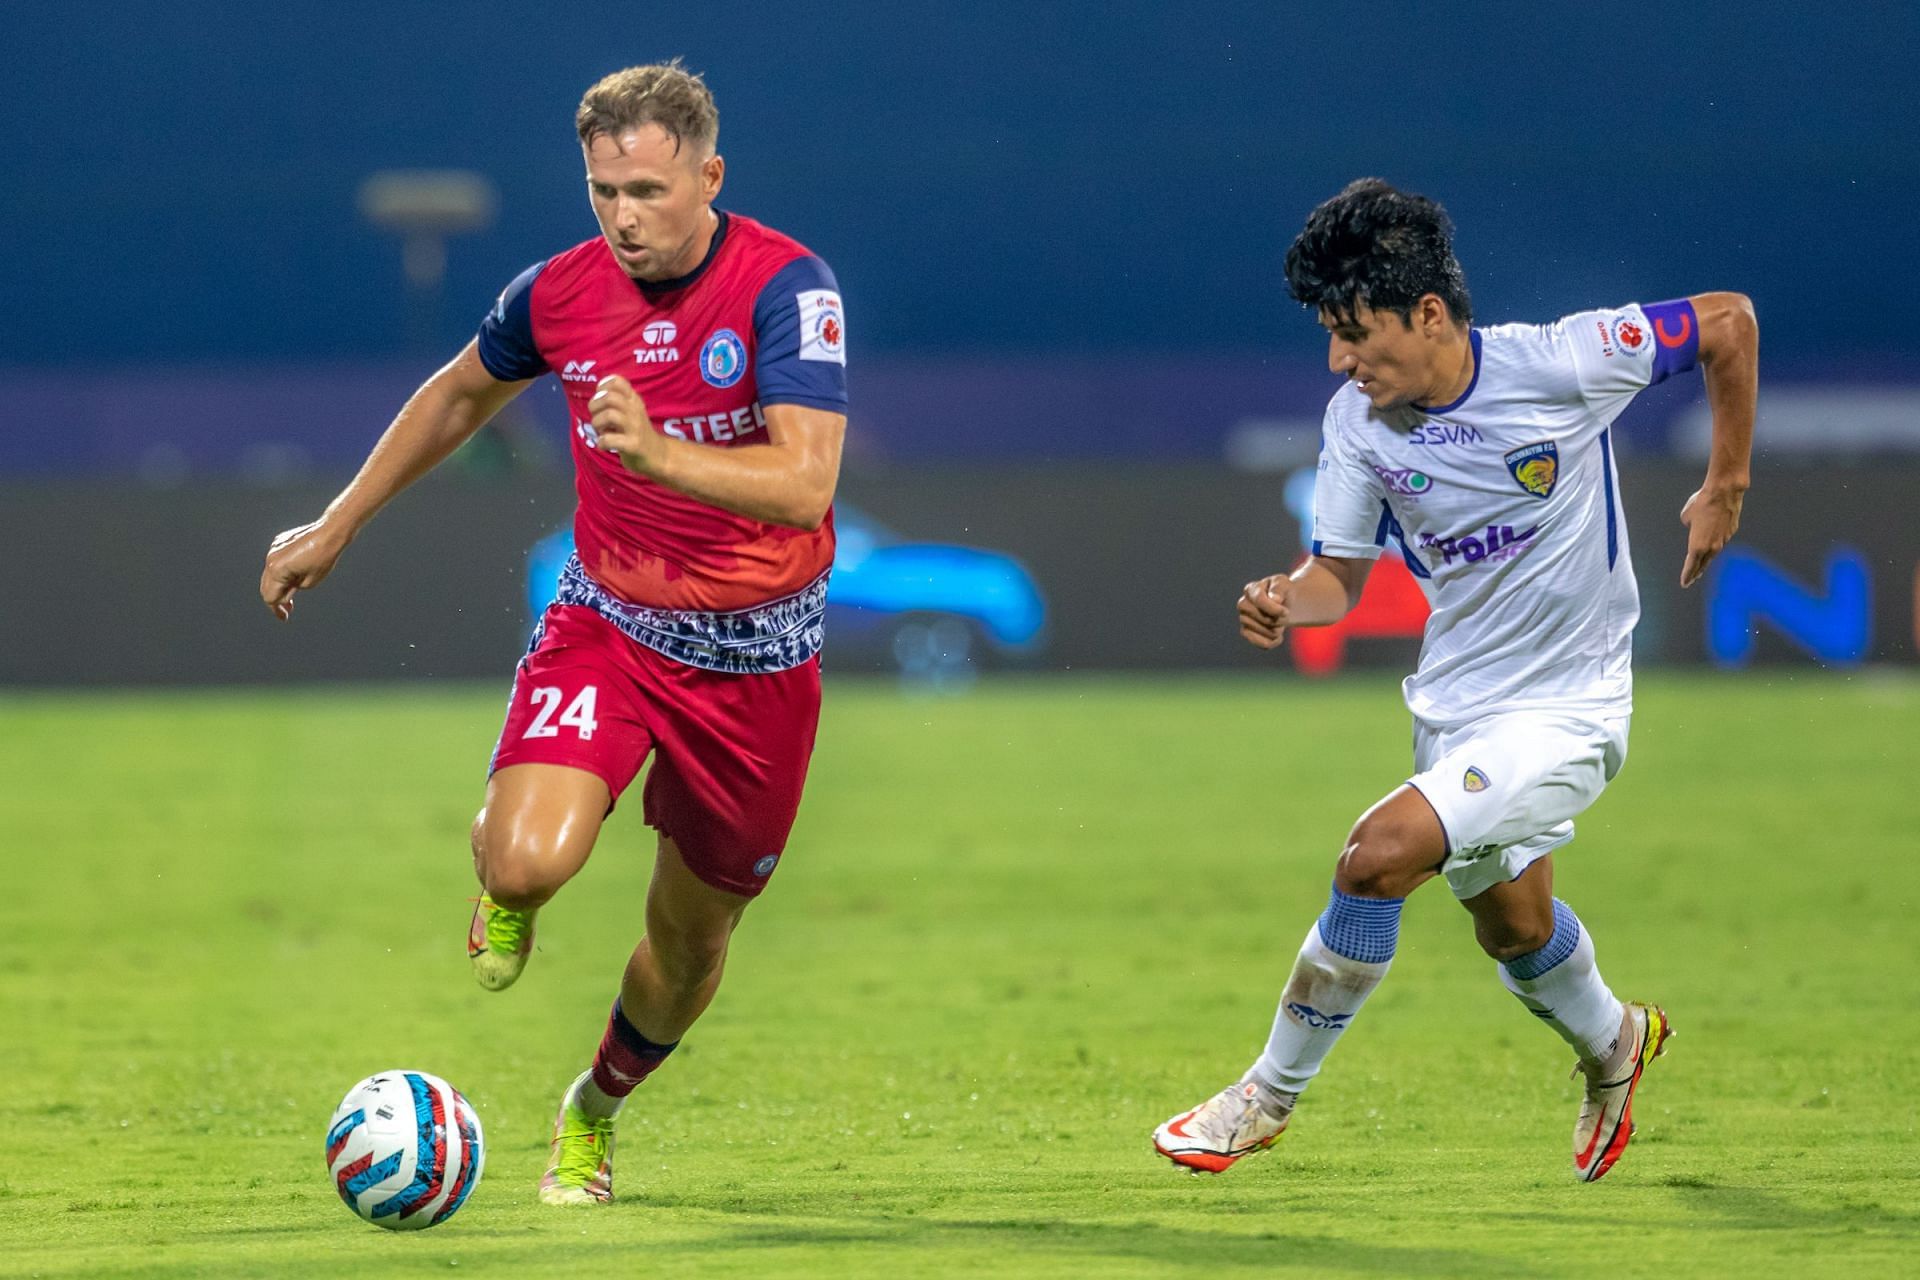 Jamshedpur FC&#039;s Greg Stewart and Chennaiyin FC&#039;s Anirudh Thapa in action at the AThletic Stadium in Bambolim (Image Courtesy: ISL)